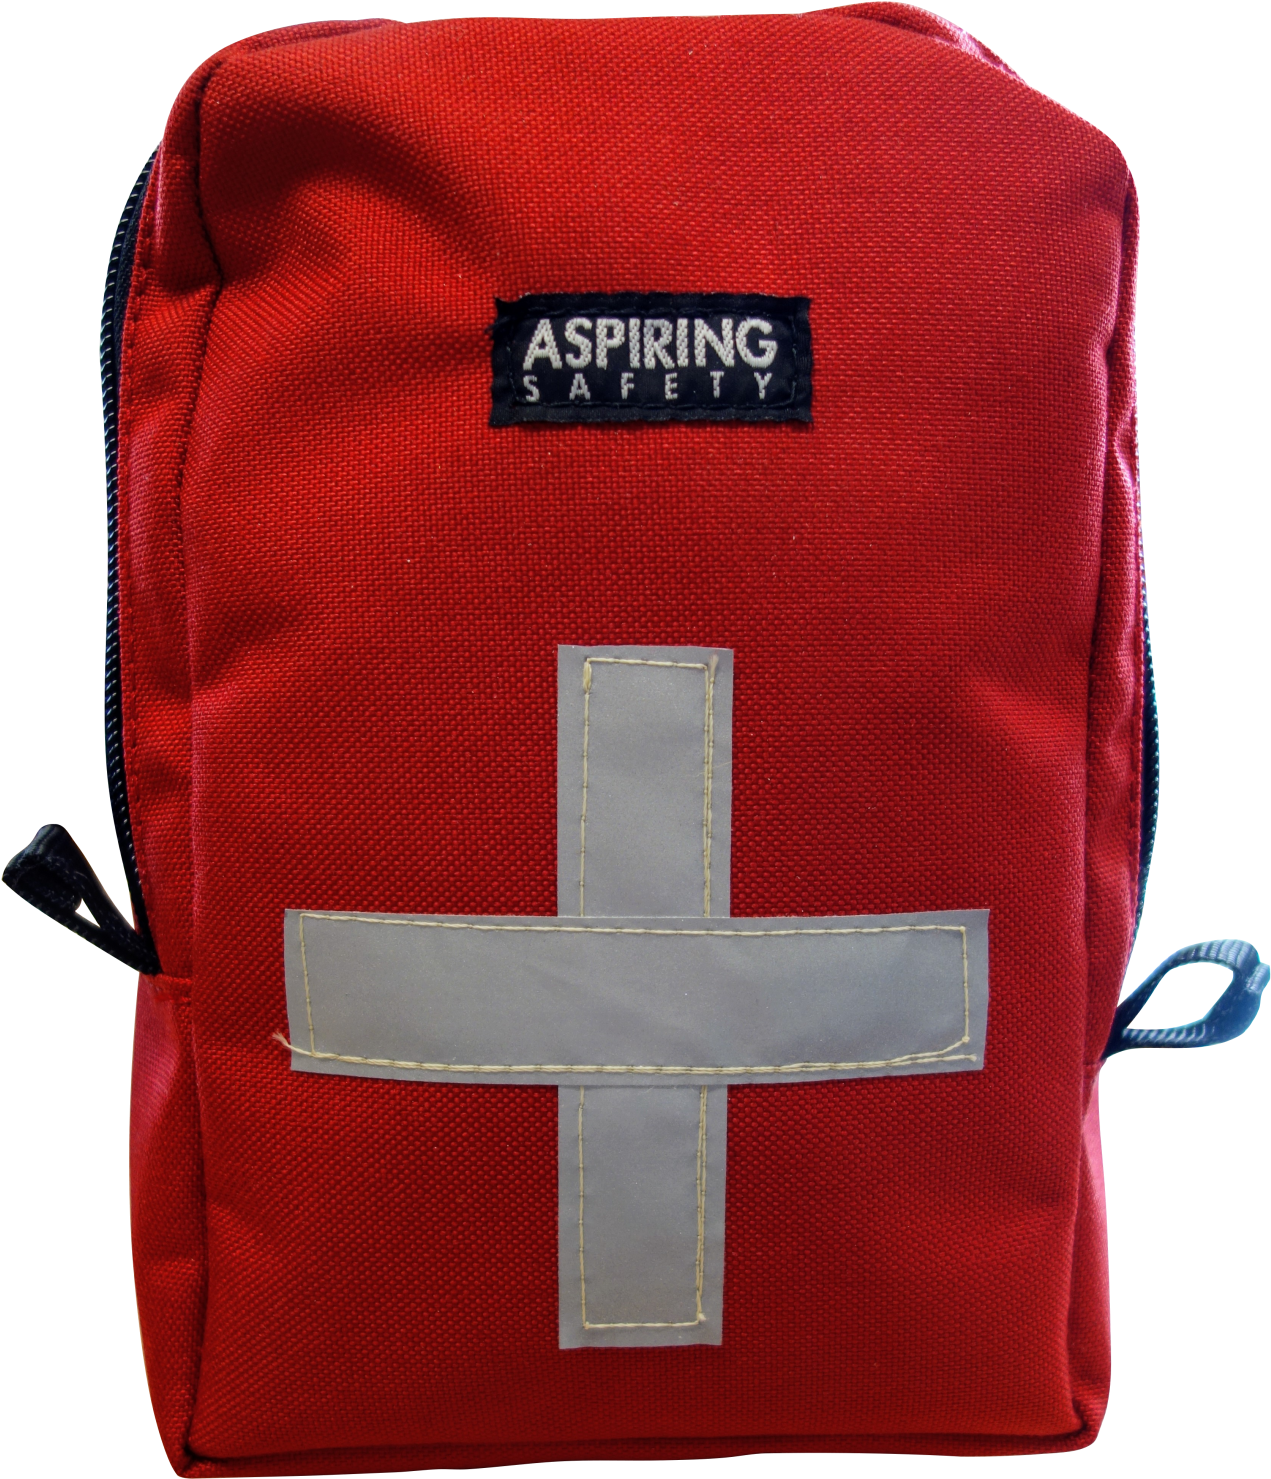 Red First Aid Kit Bag PNG image